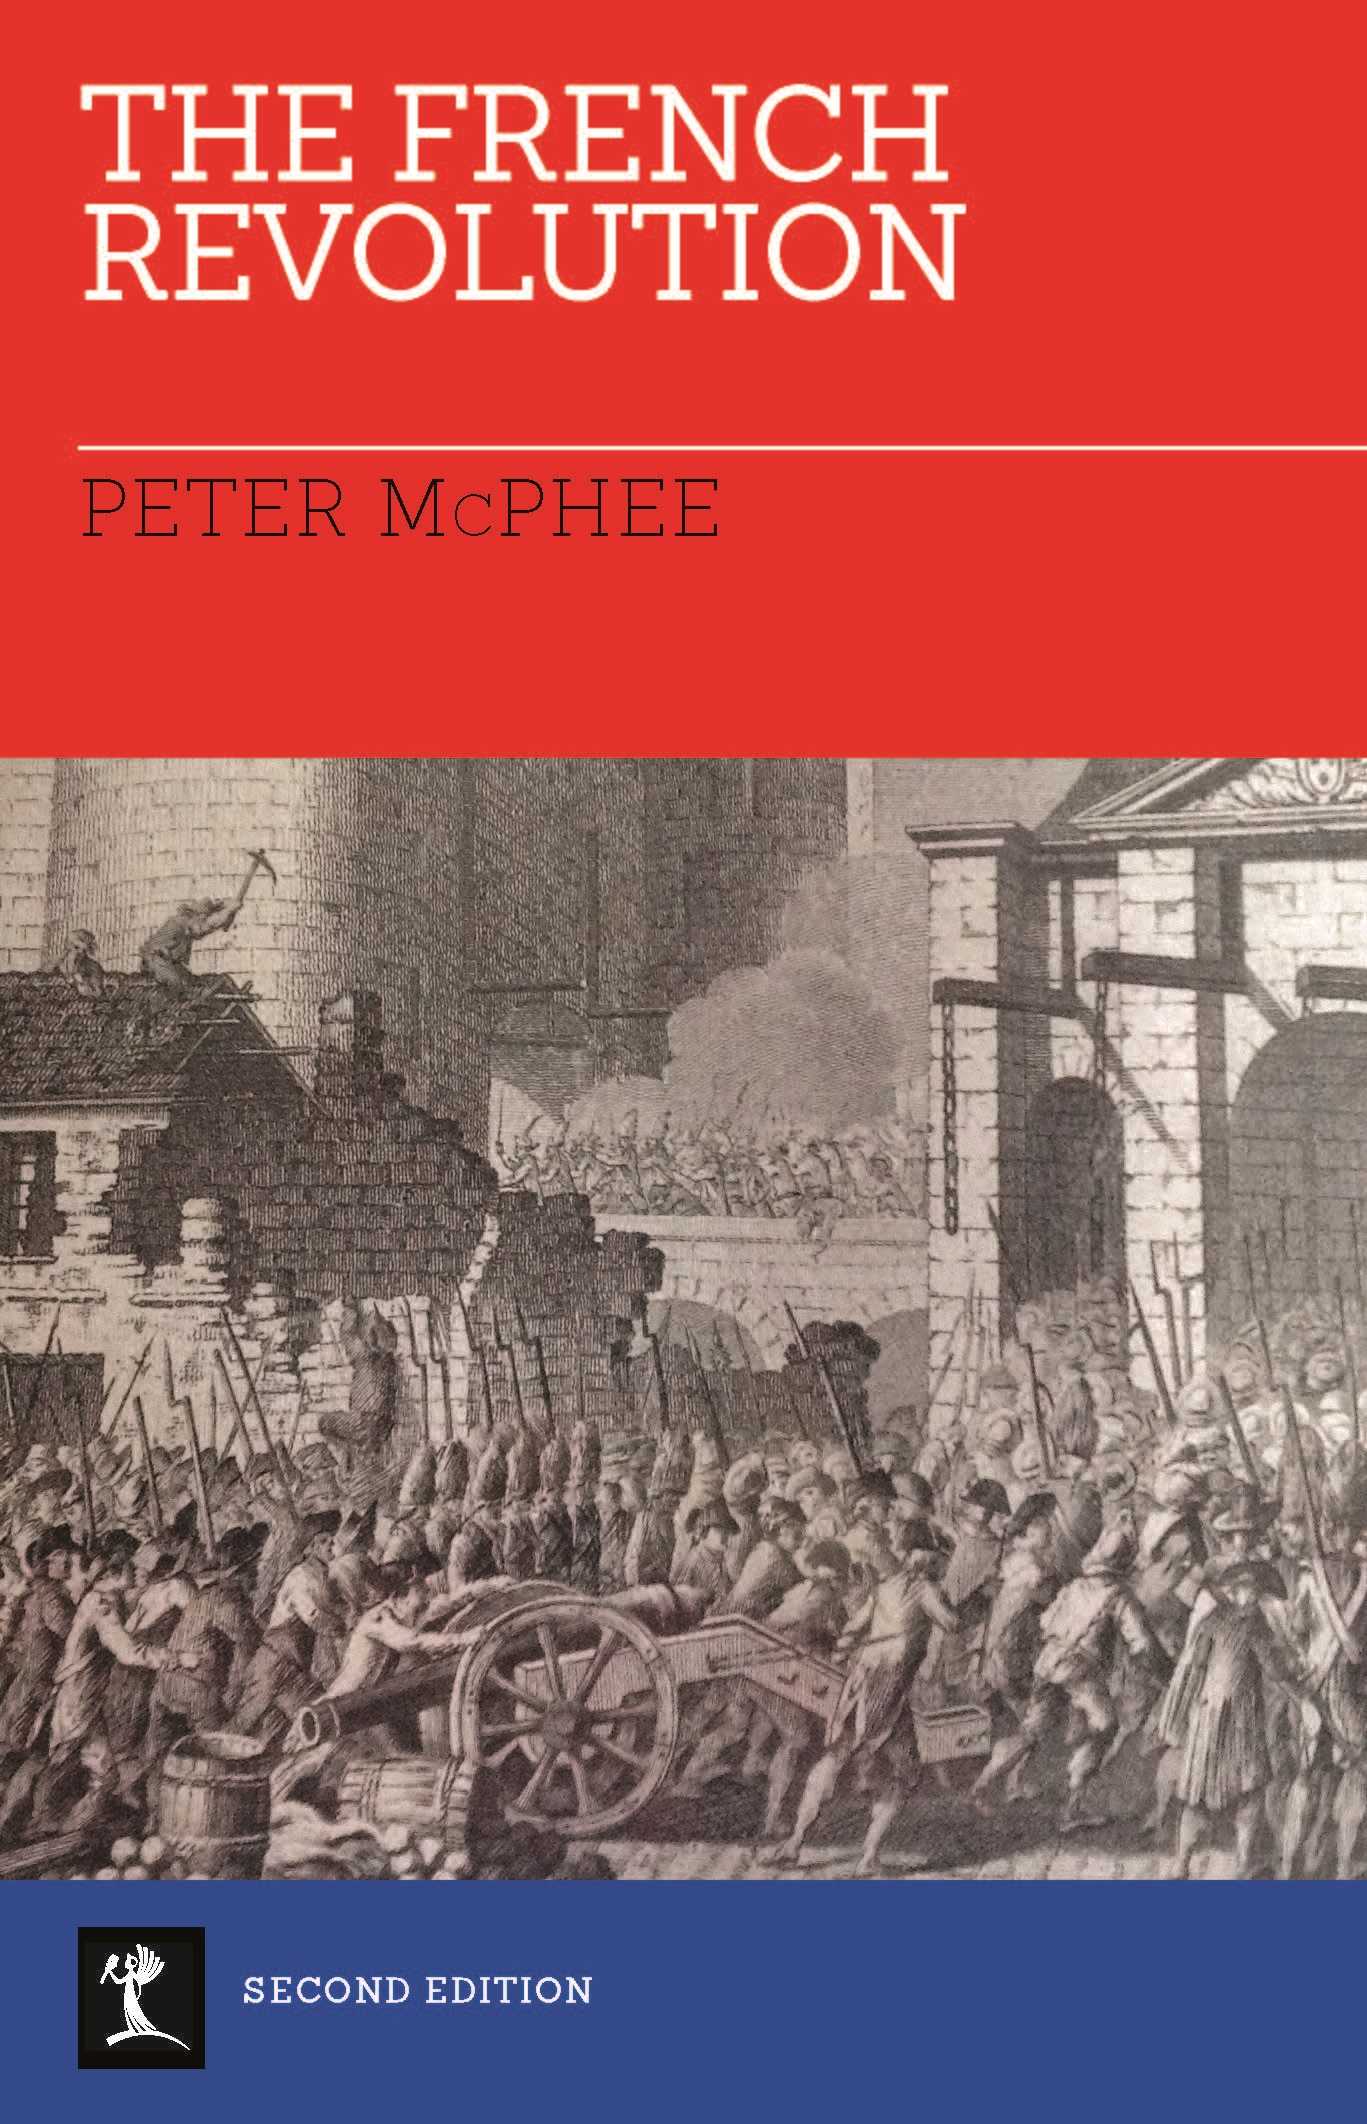 The French Revolution History Channel Worksheet and the French Revolution Peter Mcphee — Melbourne University Publishing